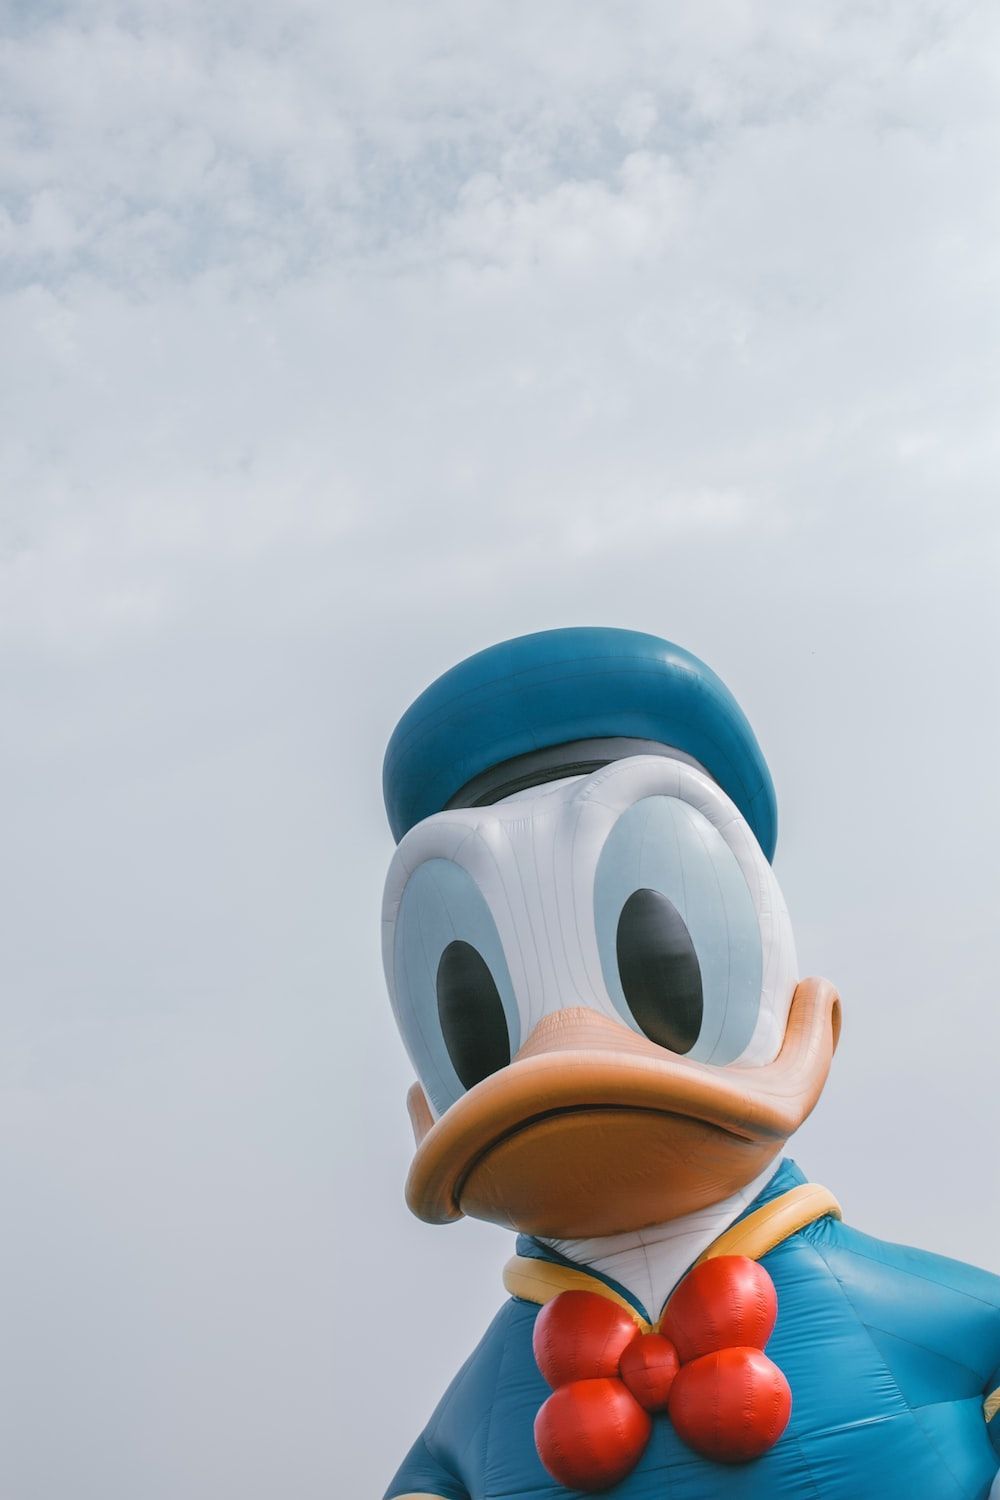 A large duck with a bow tie standing in front of a cloudy sky photo